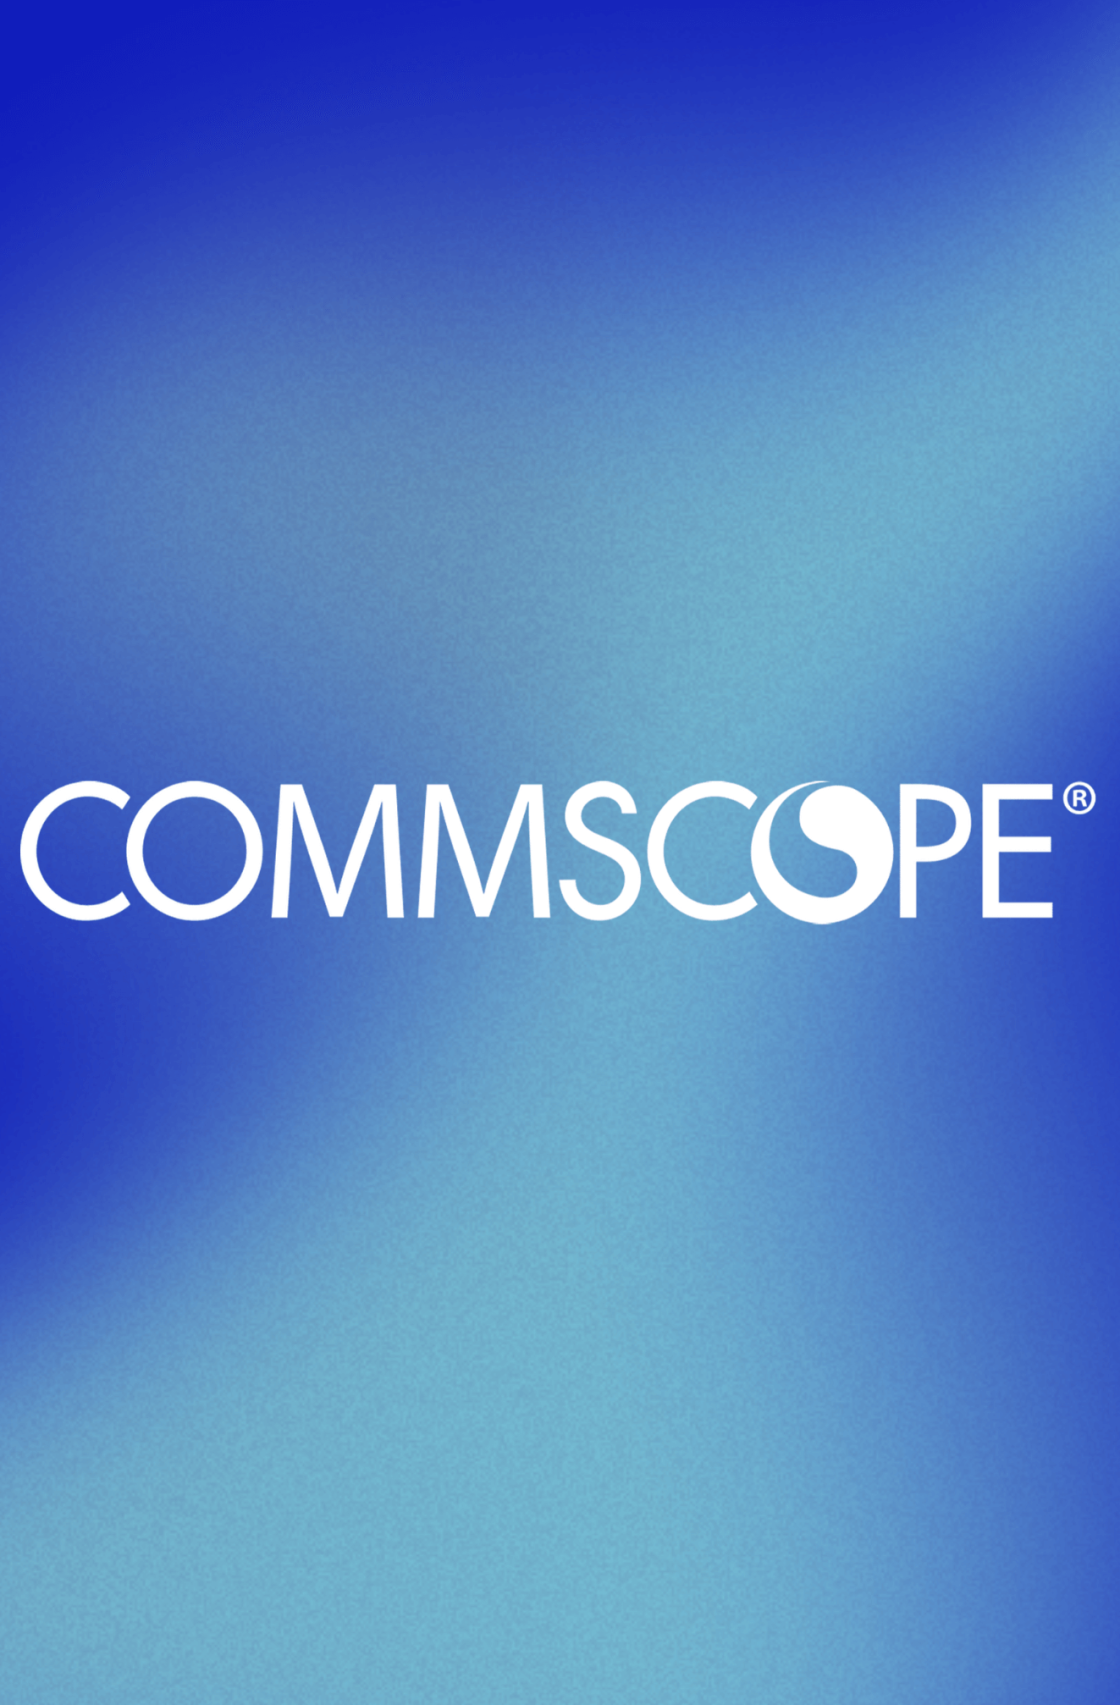 Commscope uses augmented reality for give instructions